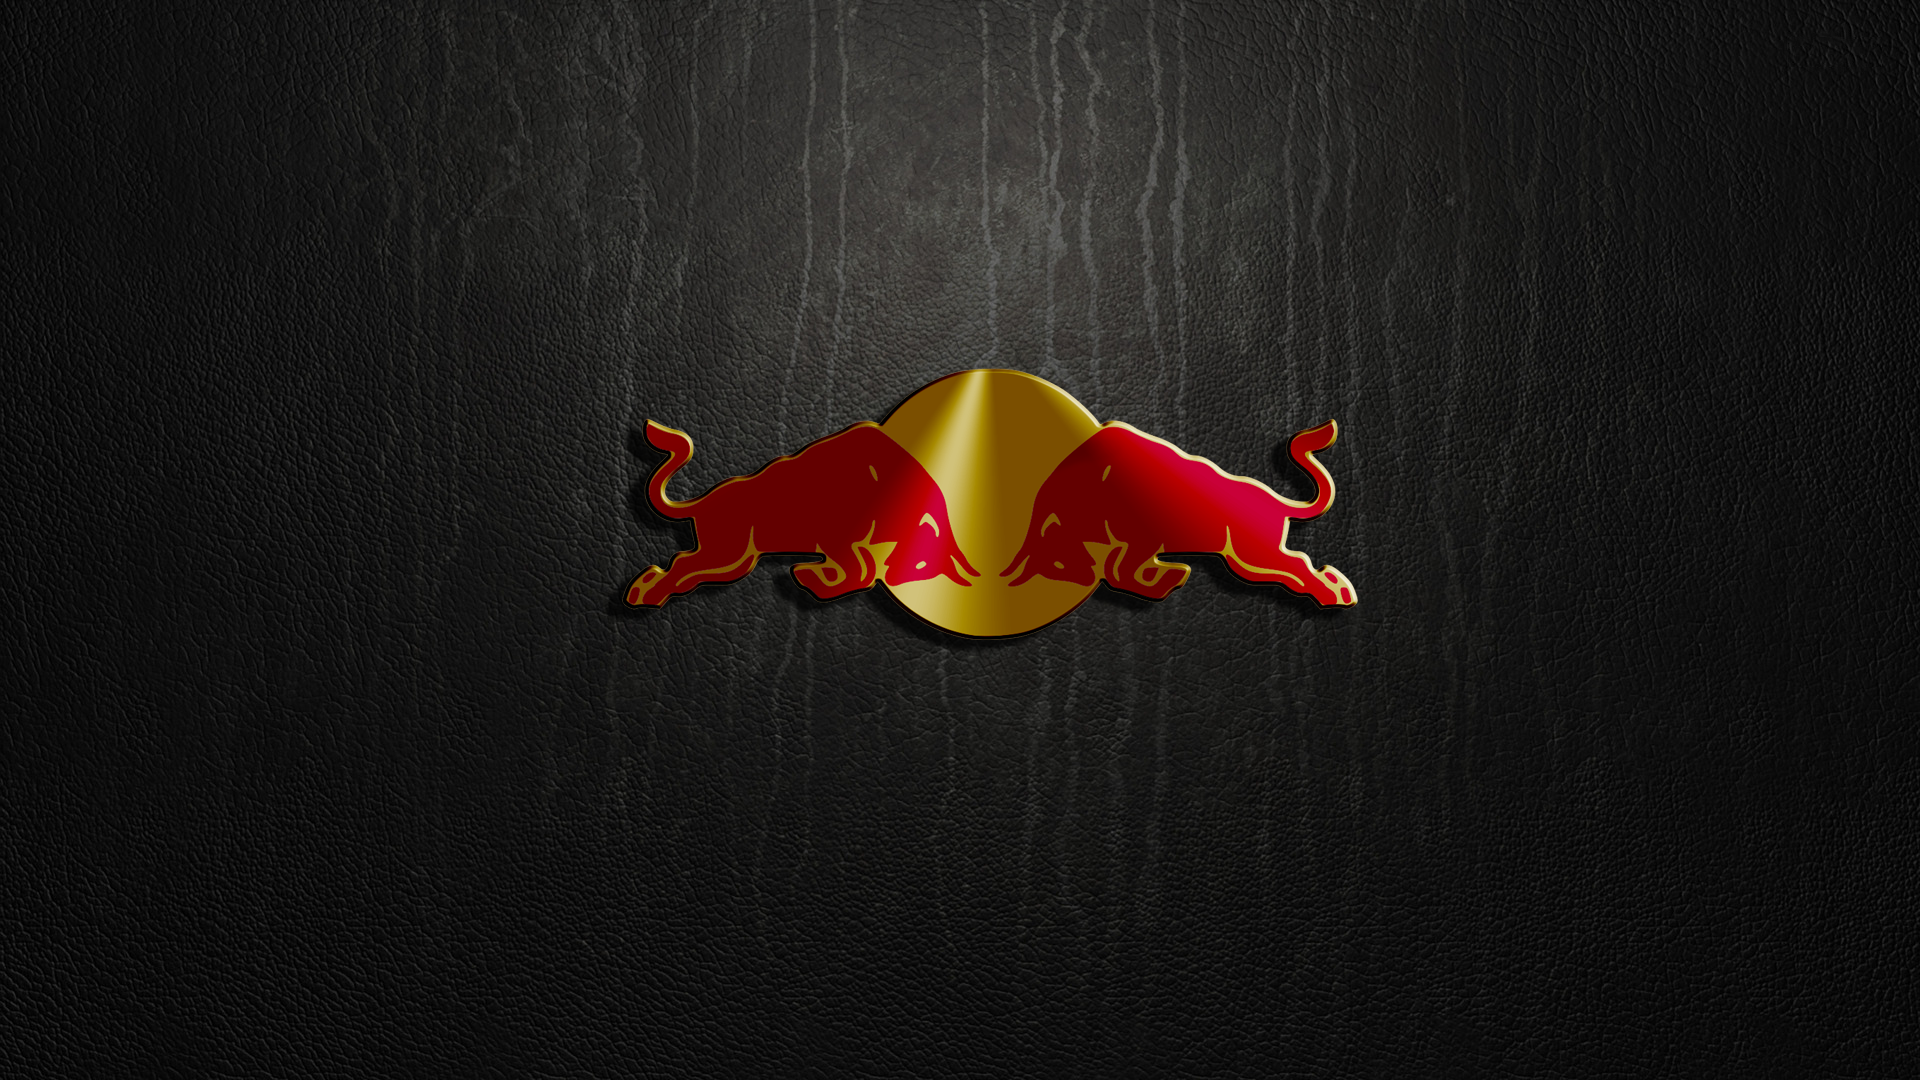 Free Download Pics Photos Red Bull Wallpaper Logo 19x1080 For Your Desktop Mobile Tablet Explore 76 Redbull Wallpapers Redbull Wallpapers Redbull Wallpaper